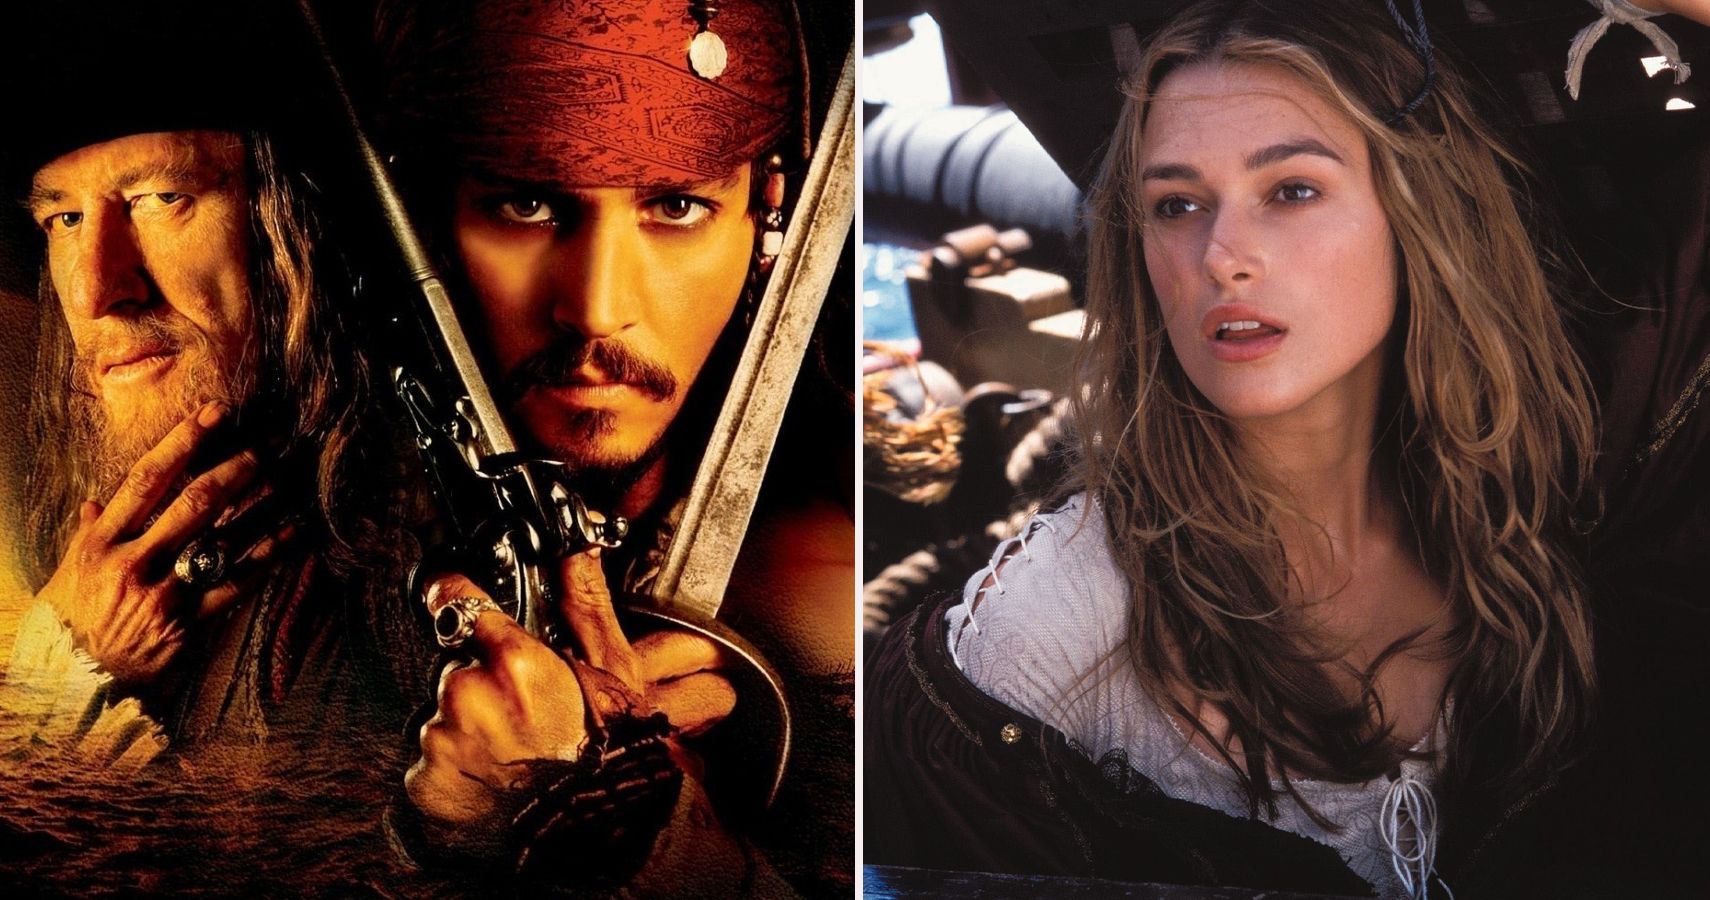 Pirates Of The Caribbean D&D Moral Alignments Of The Main Characters featured image